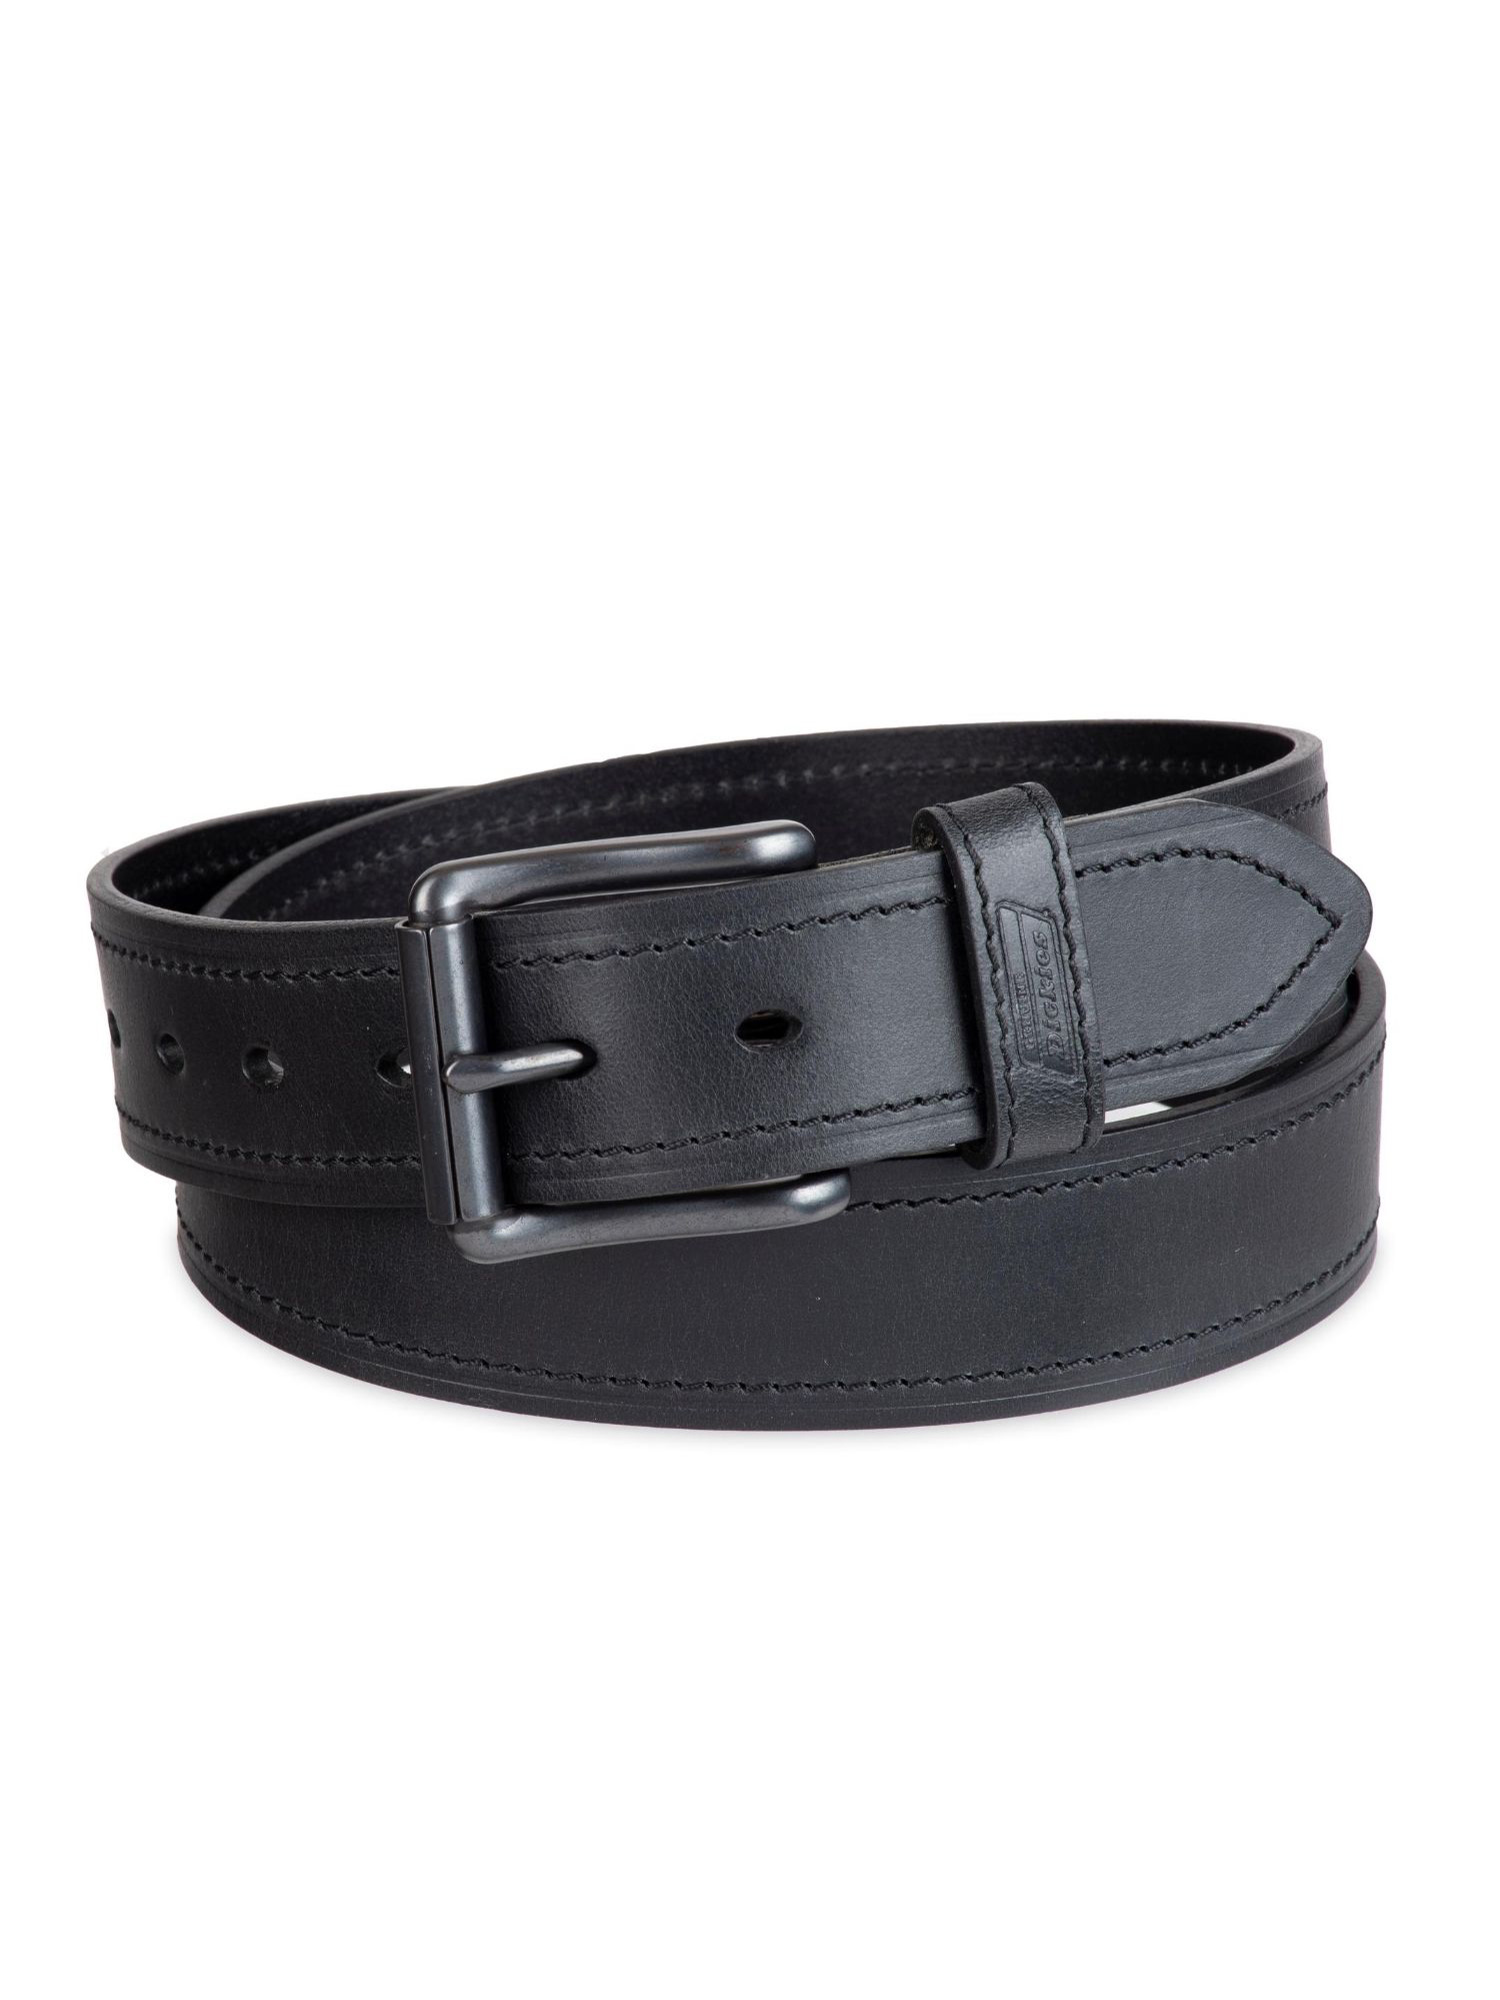 Genuine Dickies Men's Casual Black Leather Work Belt with Roller Buckle (Regular and Big & Tall Sizes) - image 1 of 6